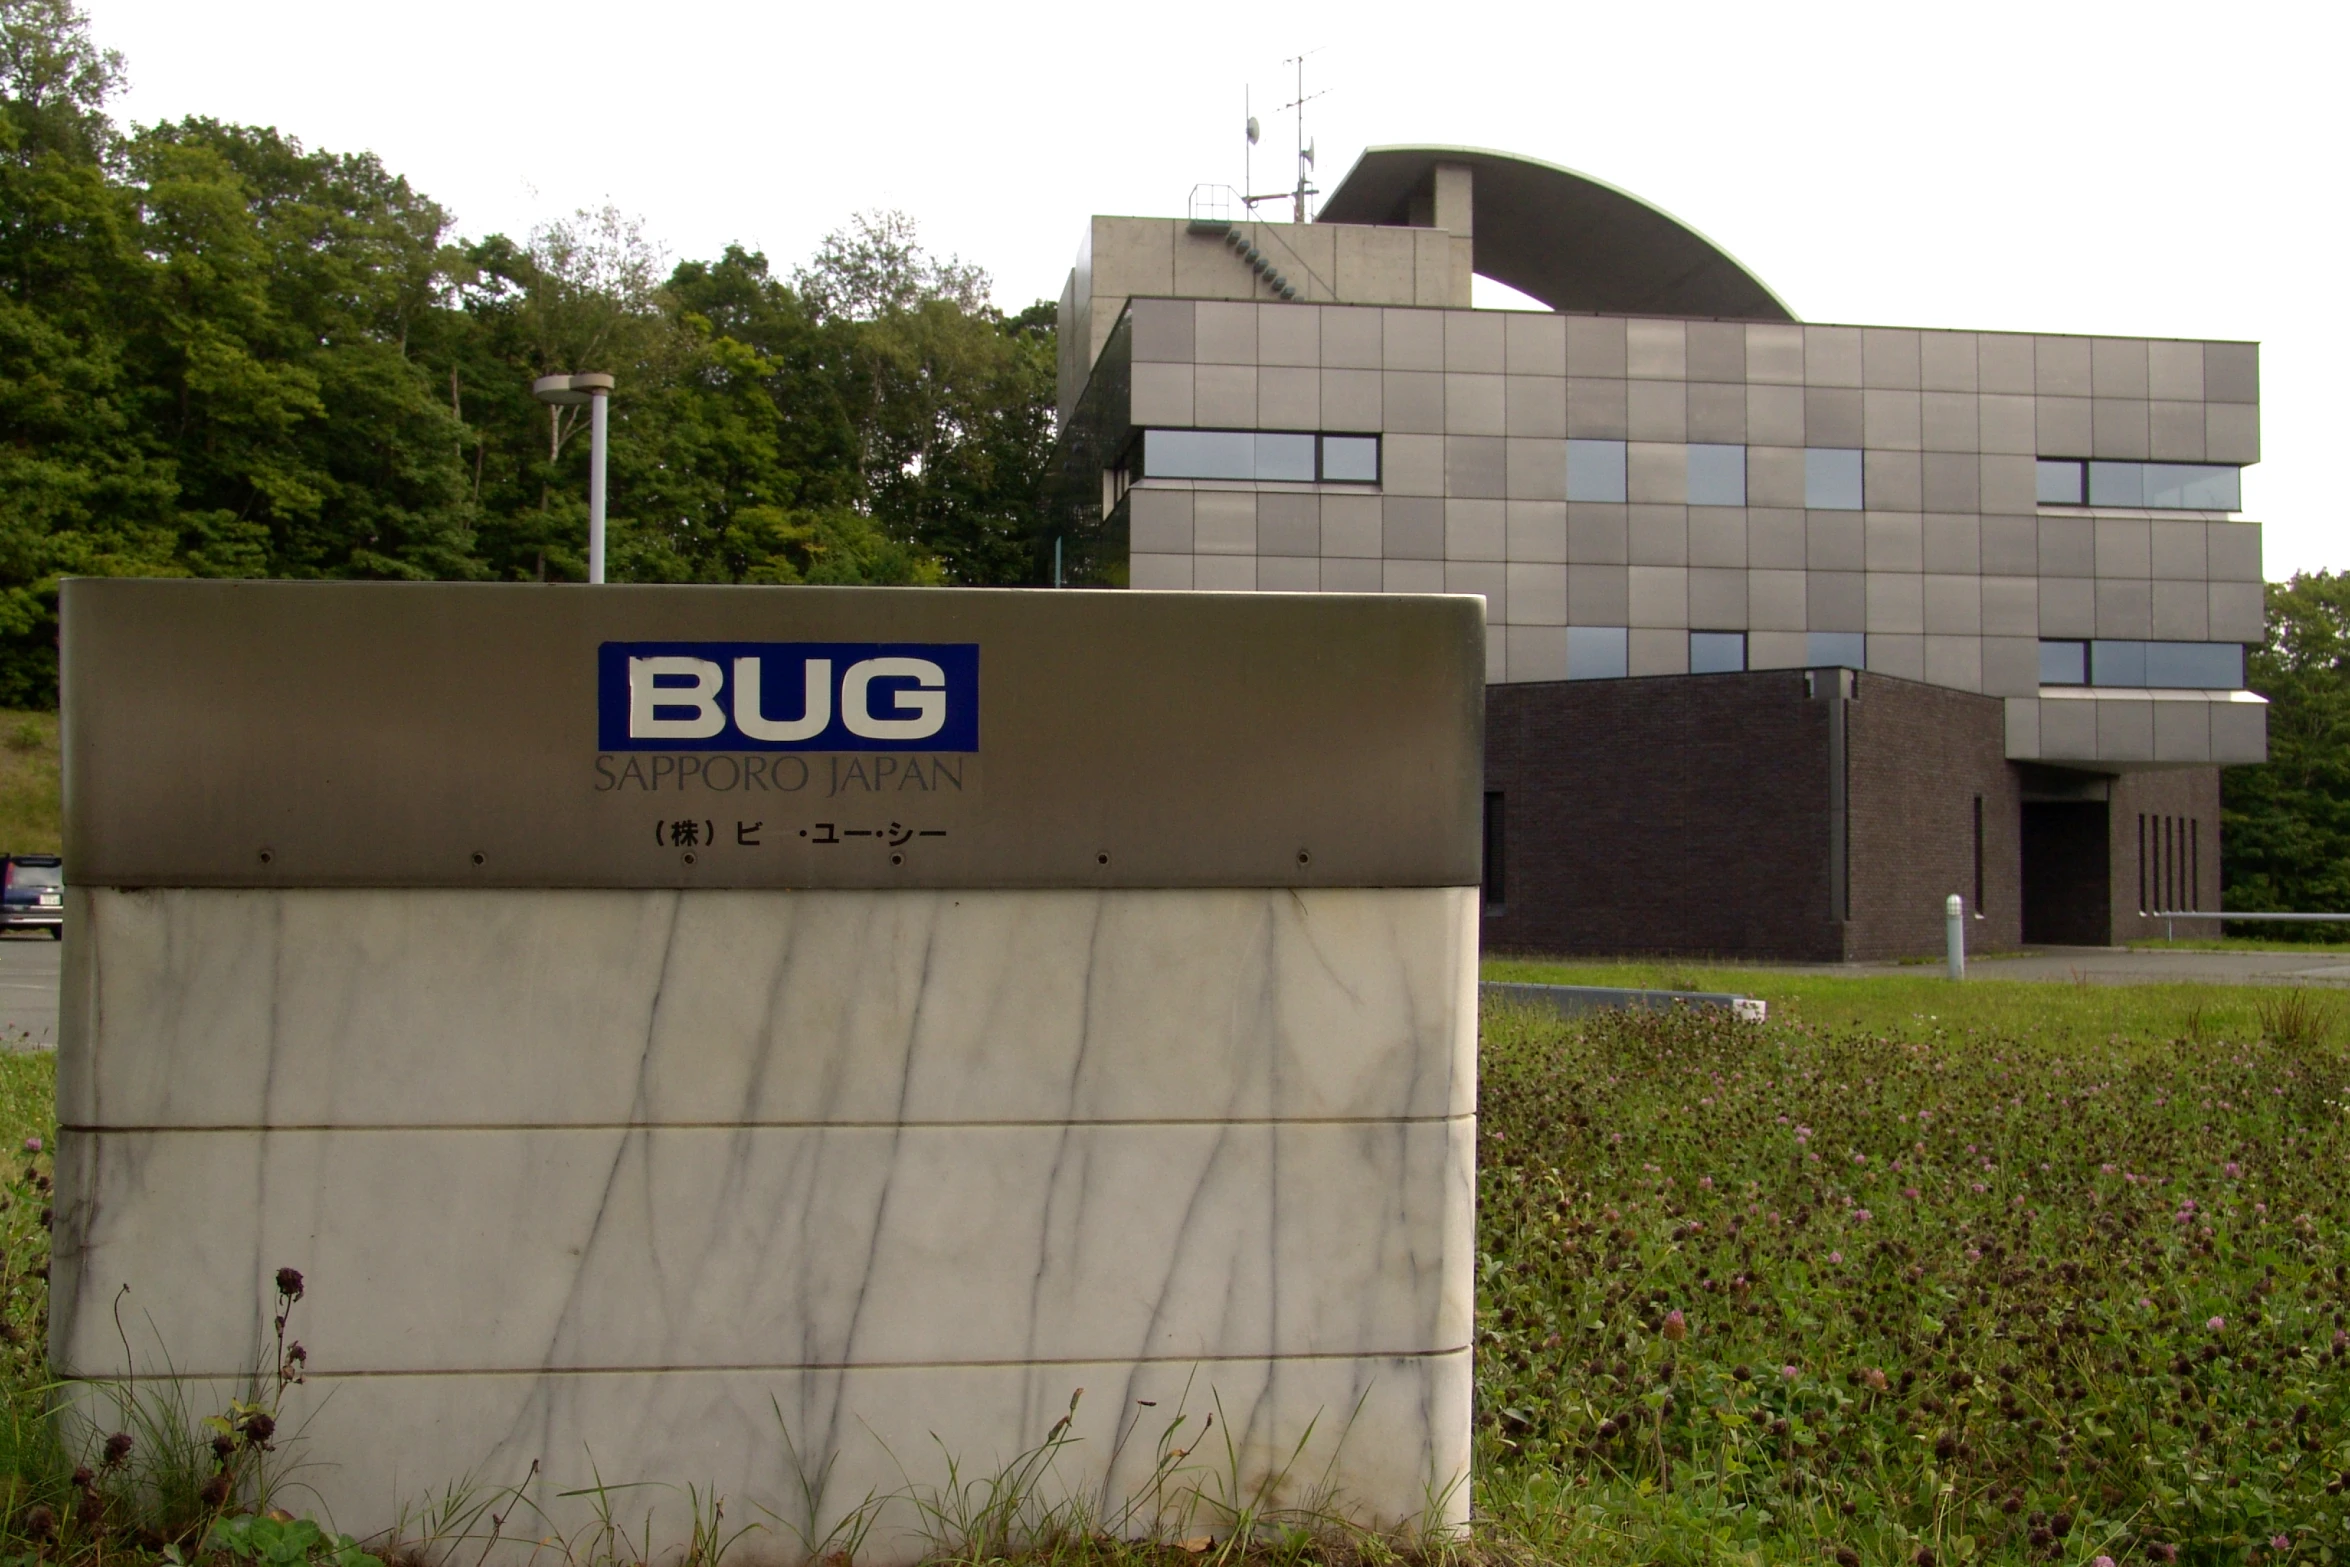 a large, two story building with a sign that says bug